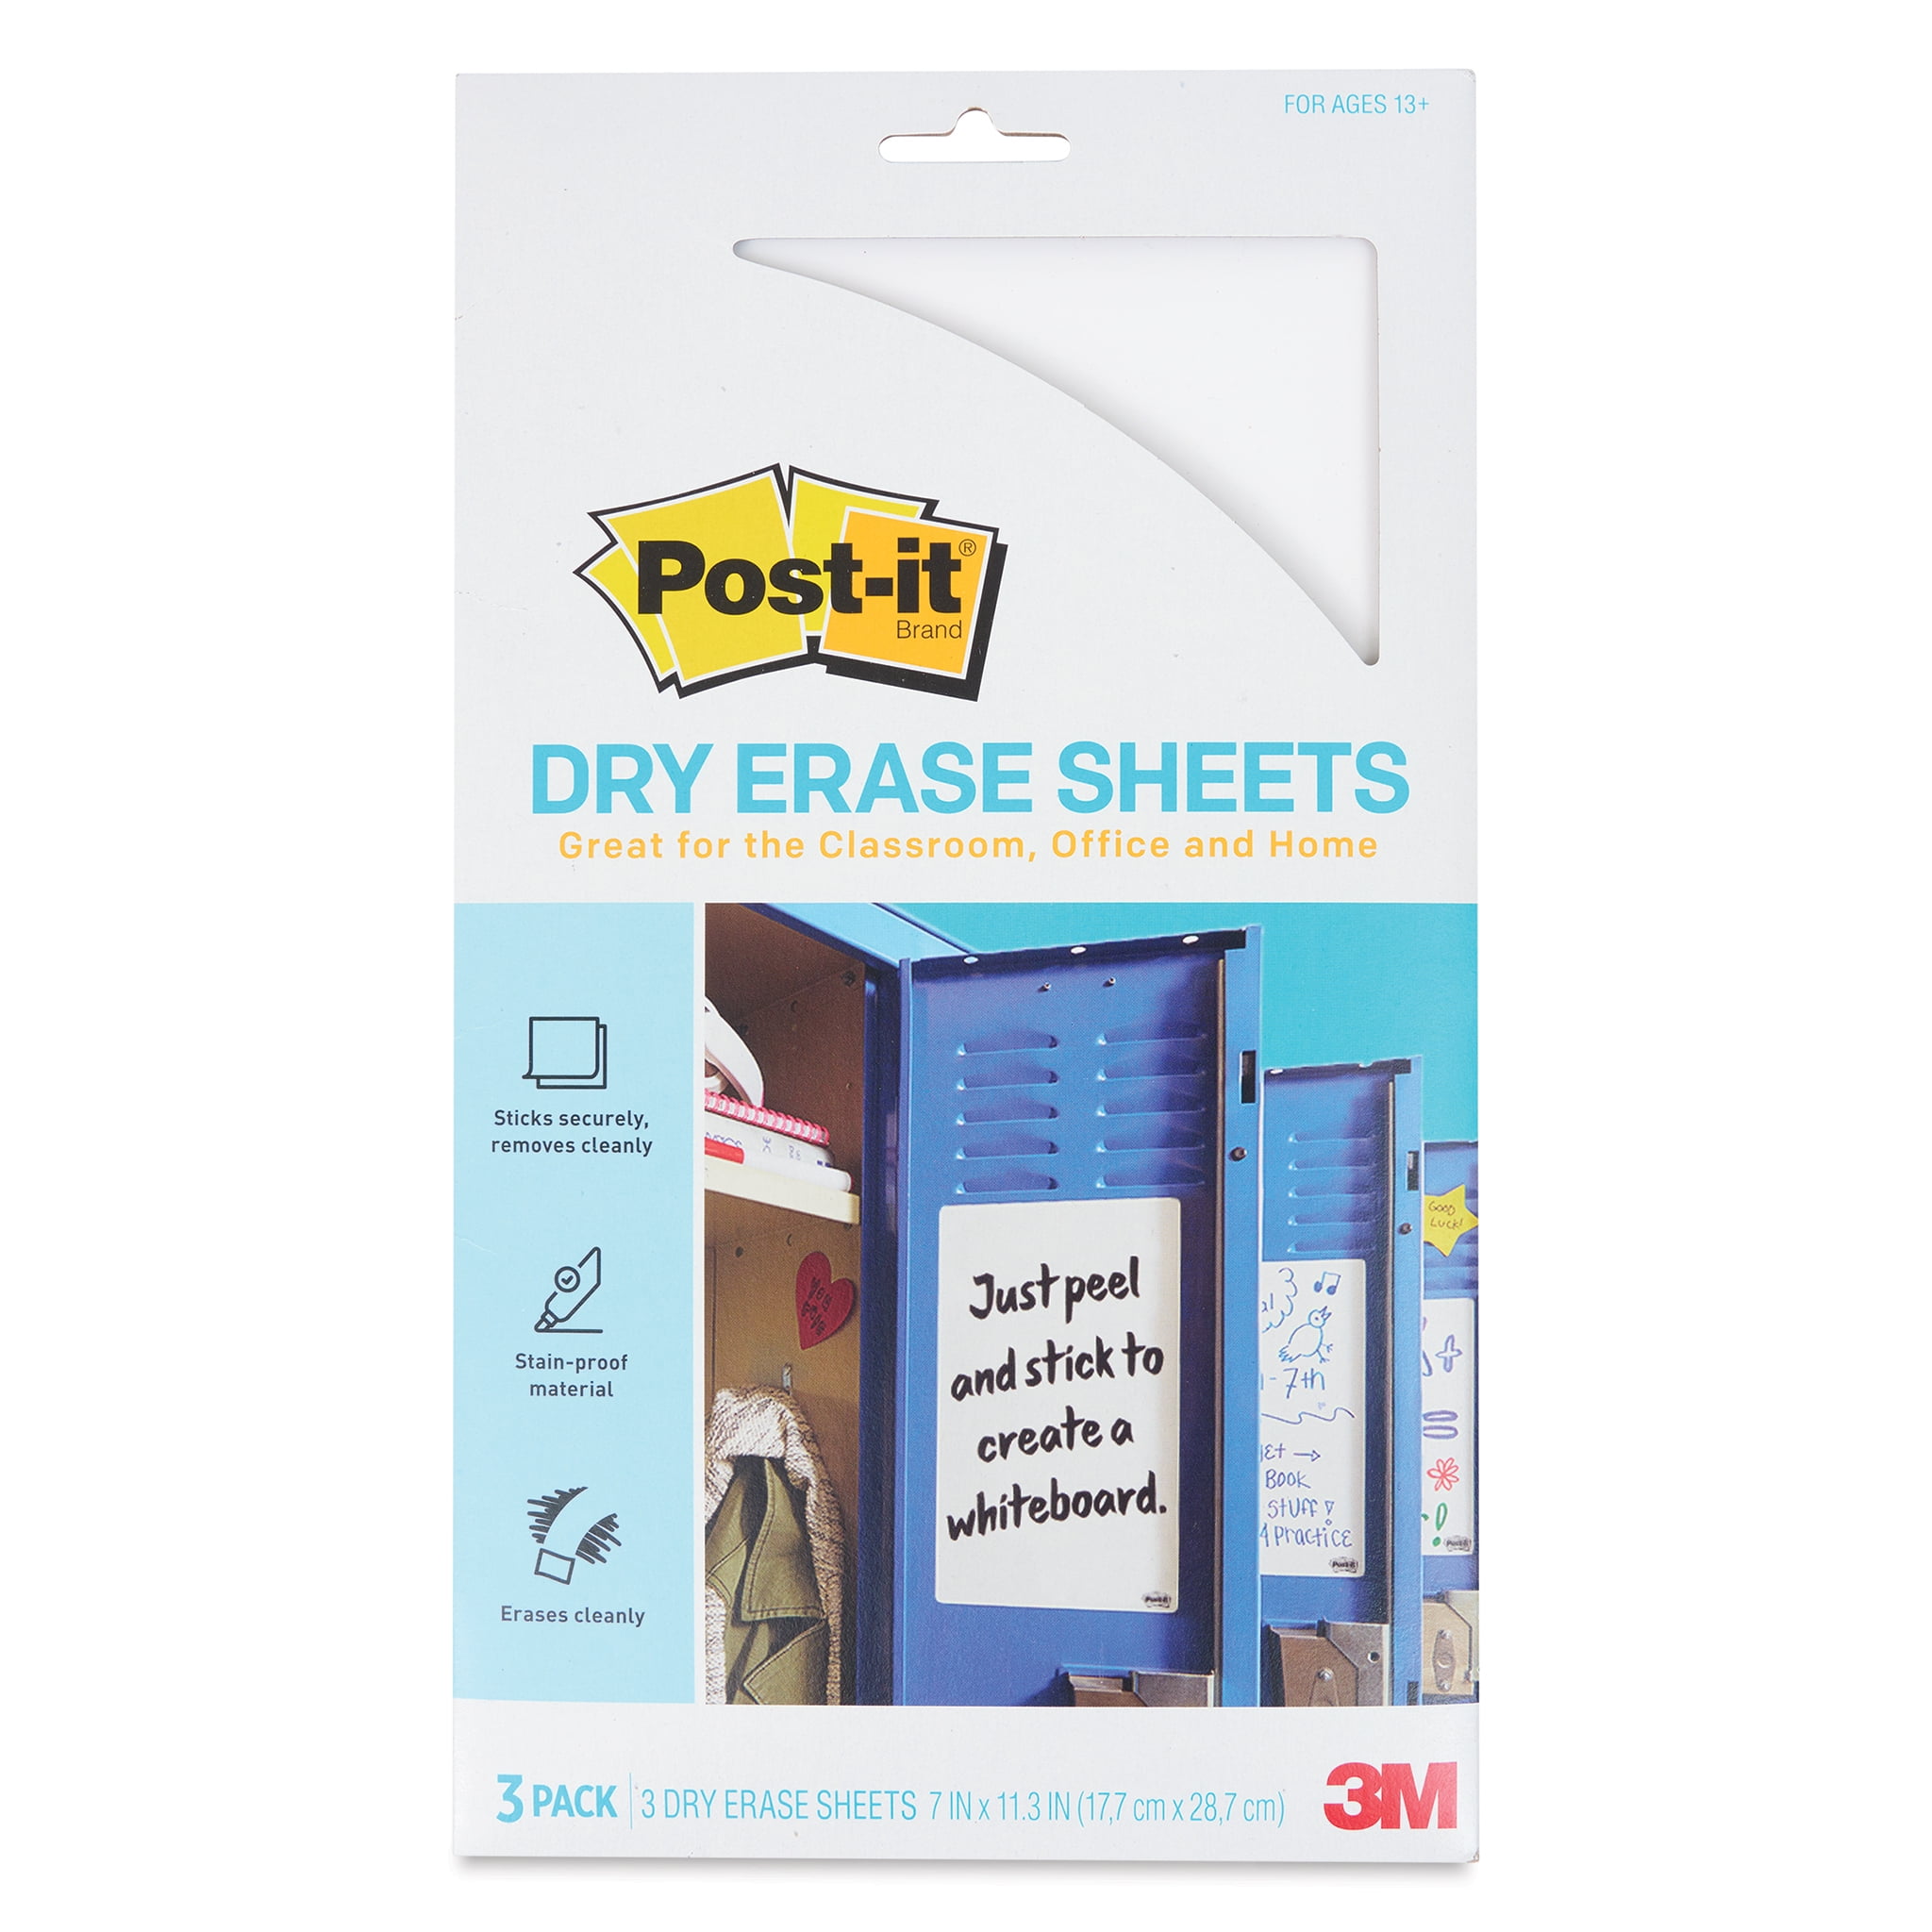 12 Pack Dry Erase Sticky Notes, 4x6 inch Mini Reusable White Board Stickers with Whiteboard Marker, Post It for Wall Office Home